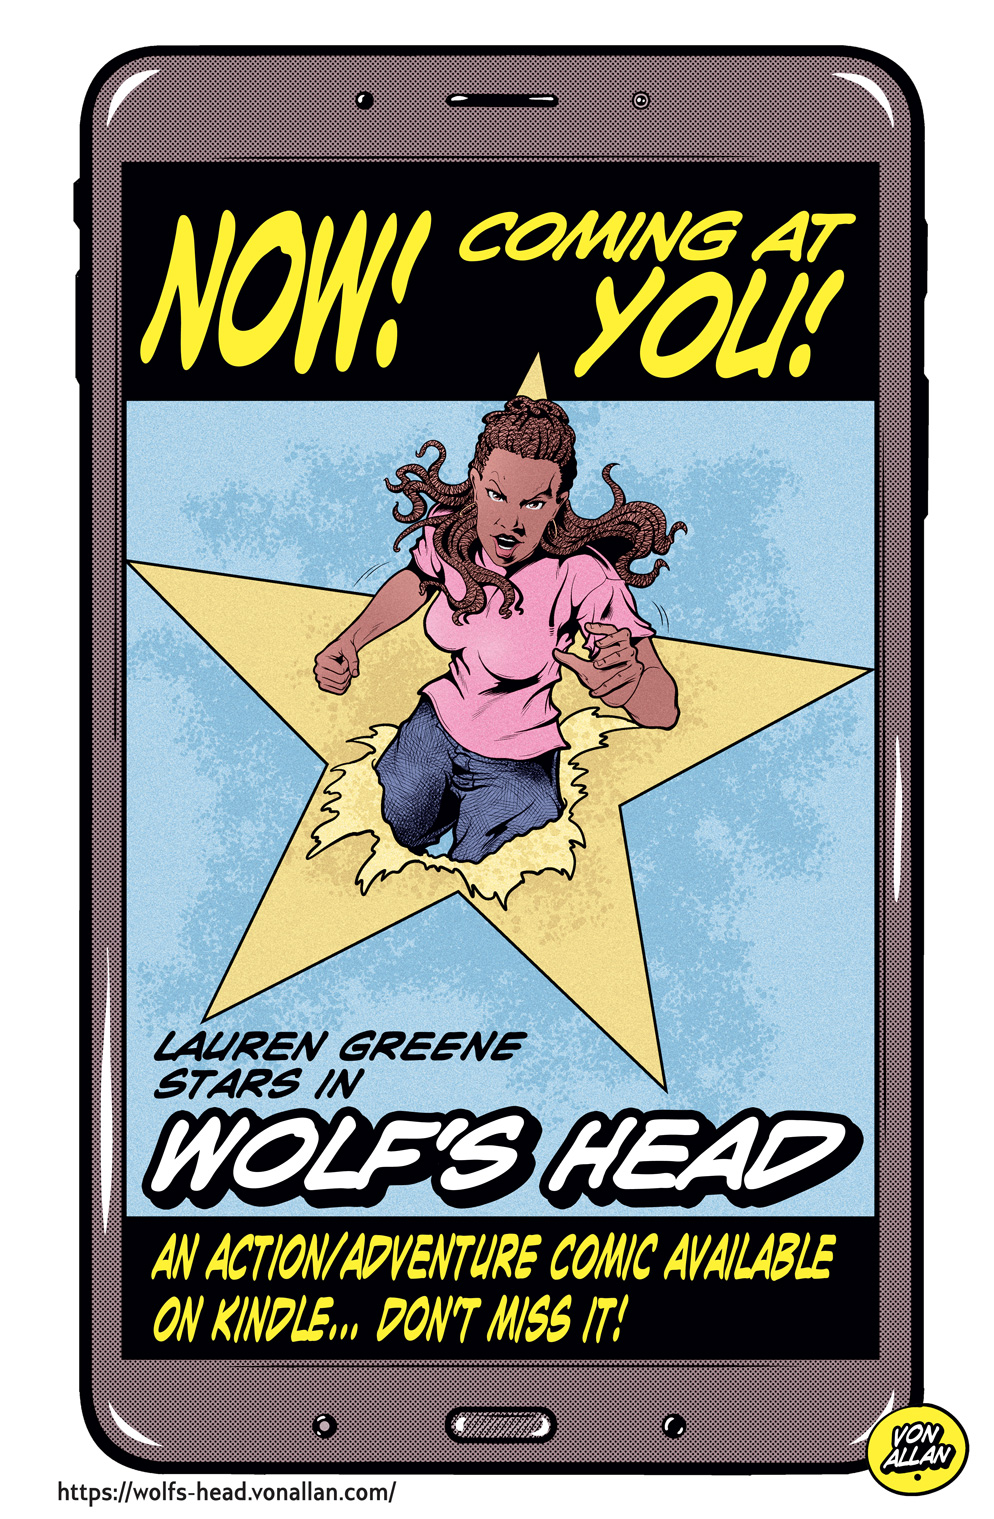 Teaser image of Lauren Greene, the main character from Wolf's Head, on Kindle